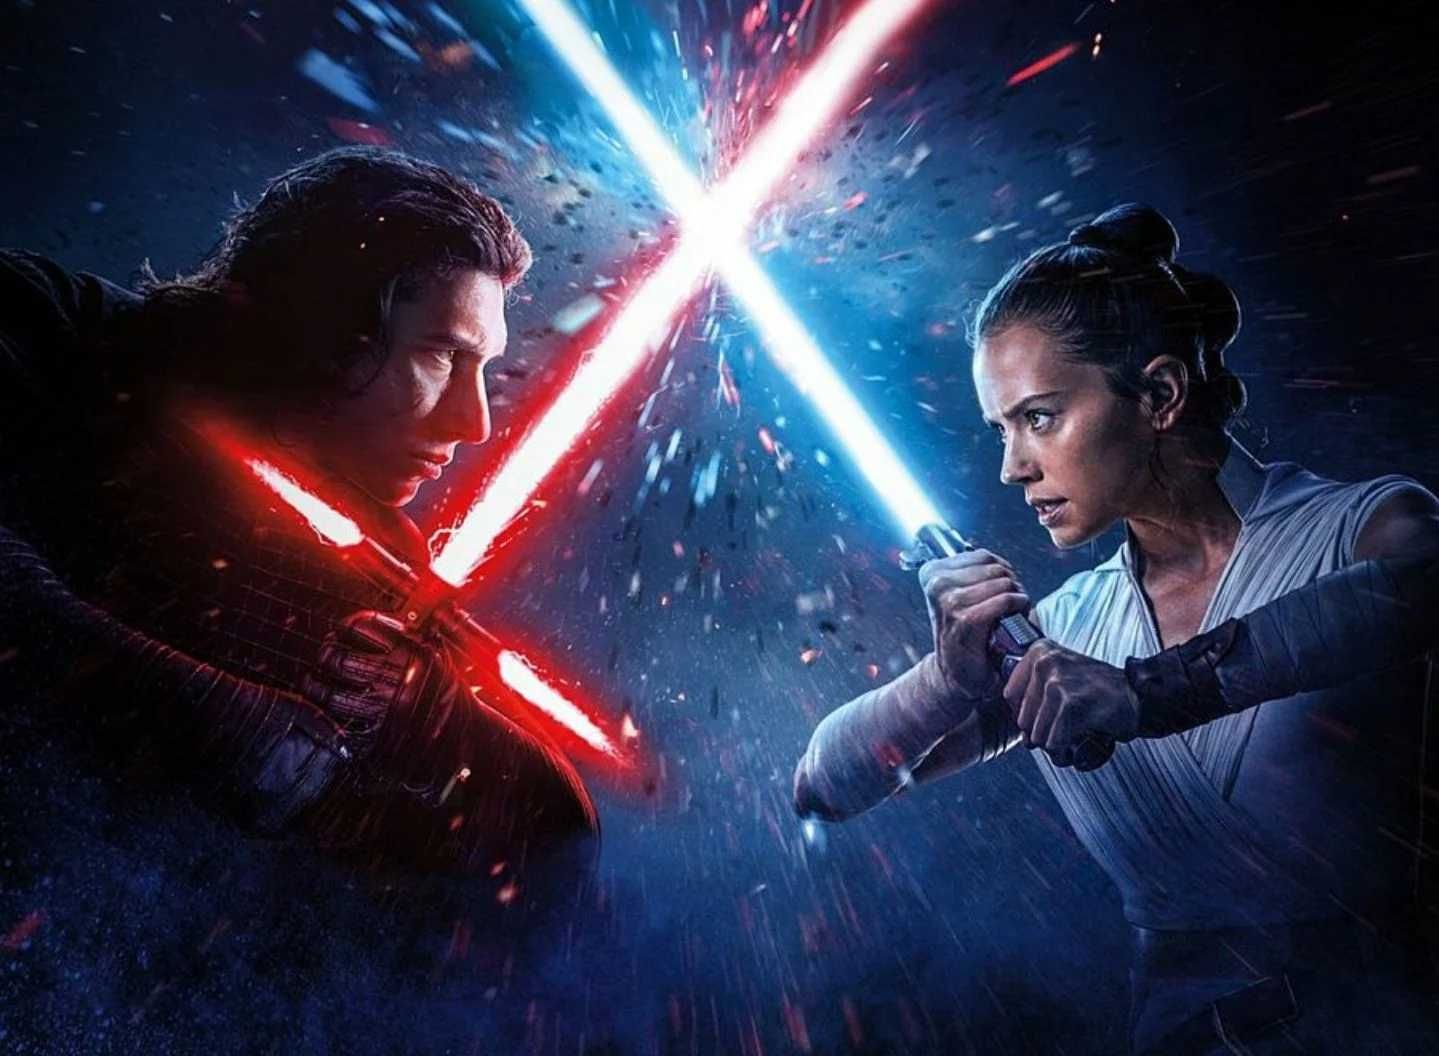 Following in the footsteps of Avengers: Endgame?: When the box office predictions for 'Star Wars: The Rise of Skywalker' soared